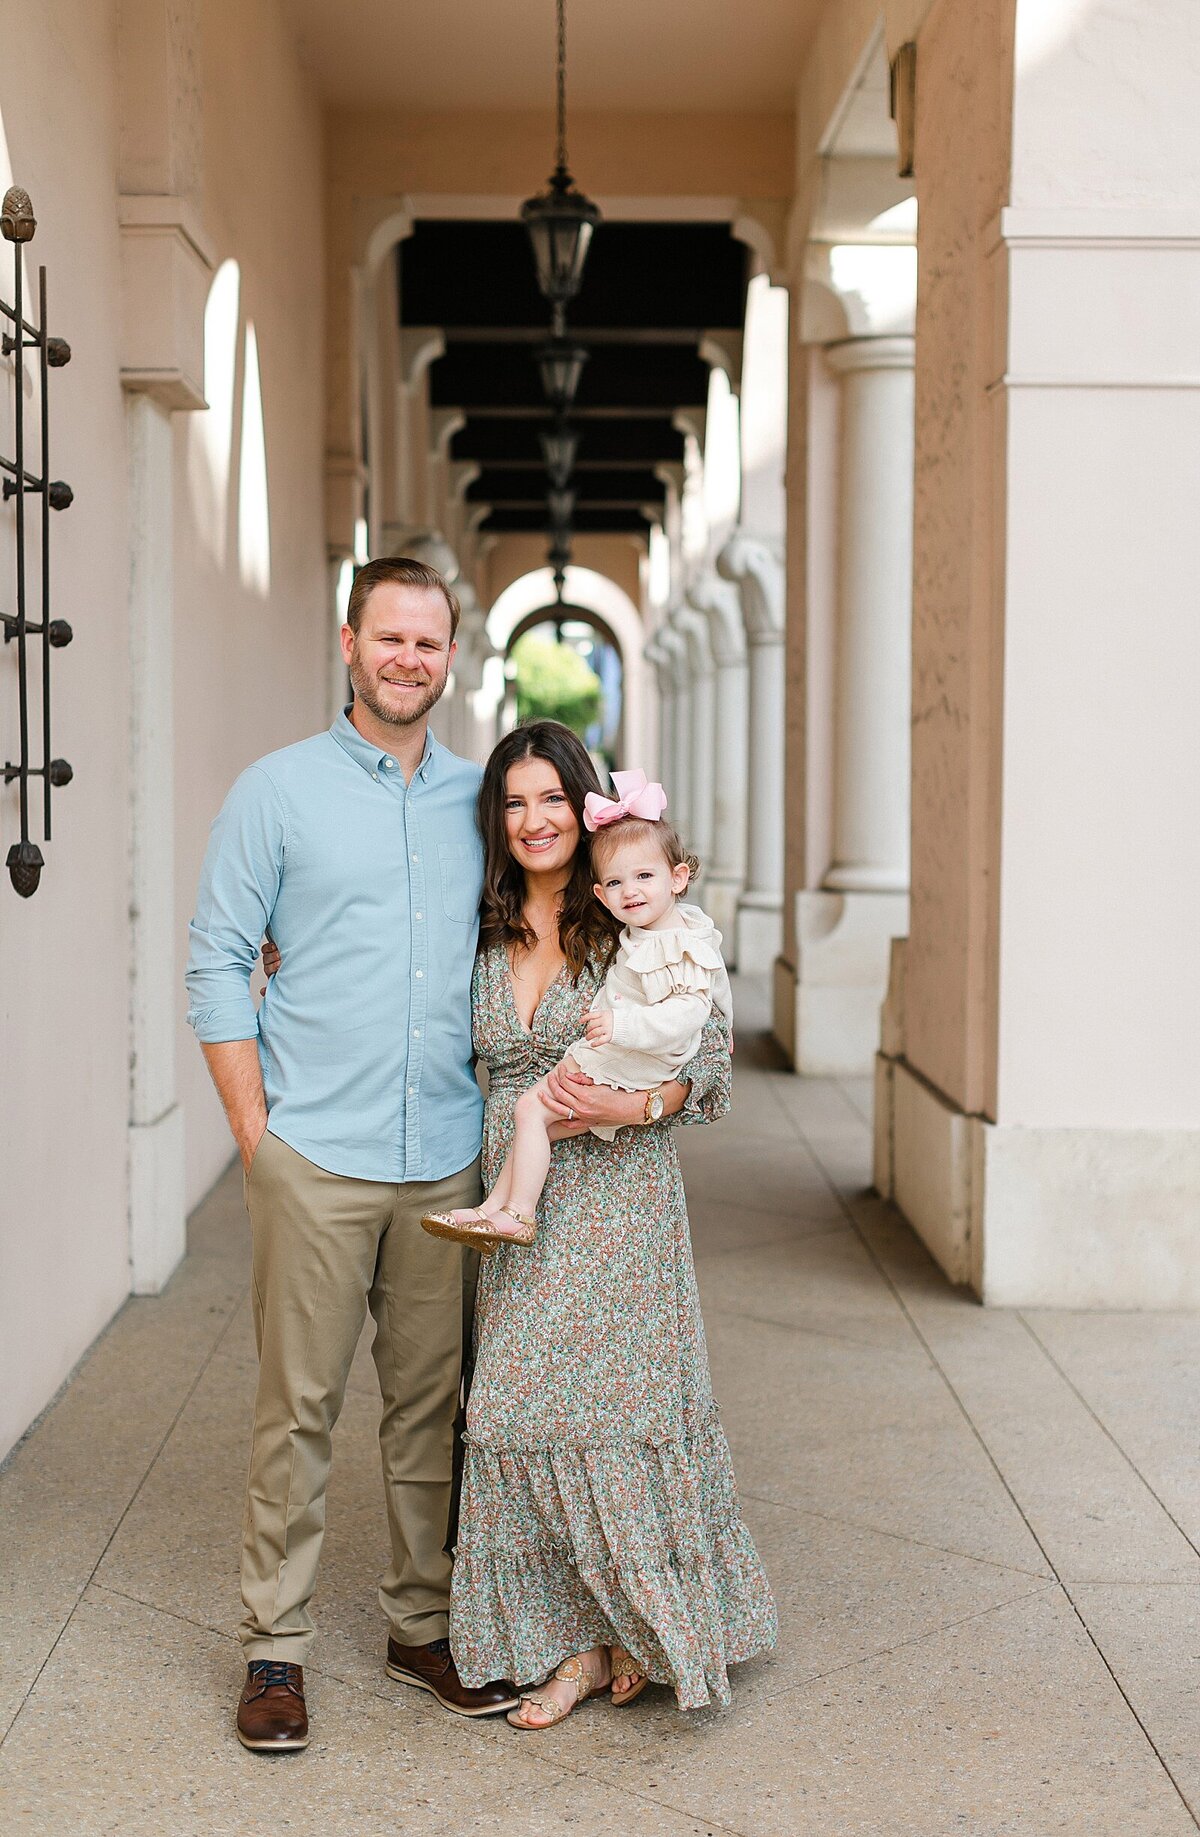 worth-ave-young-family-photos-brandi-watford-photography_0006